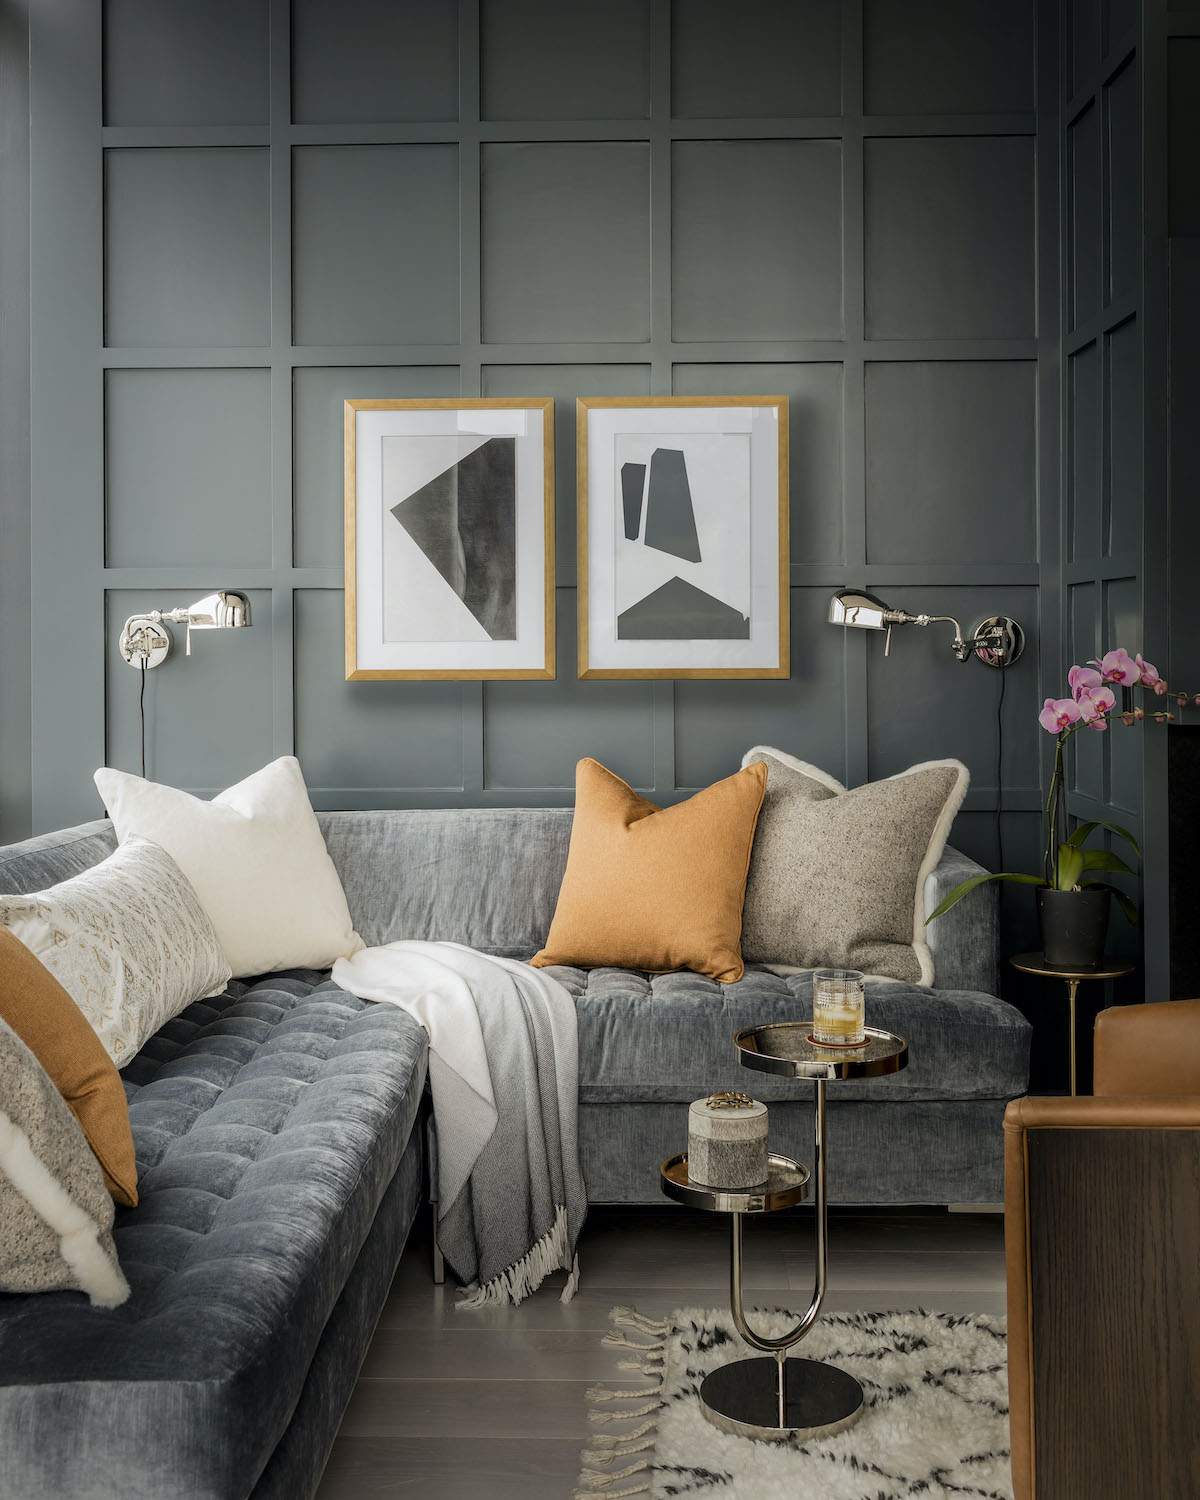 Grey sectional sofa with biscuit tufting on the seat to mirror the rectilinear paneling on the walls. Pair of silver sconces flank pair of lithographs on wall.